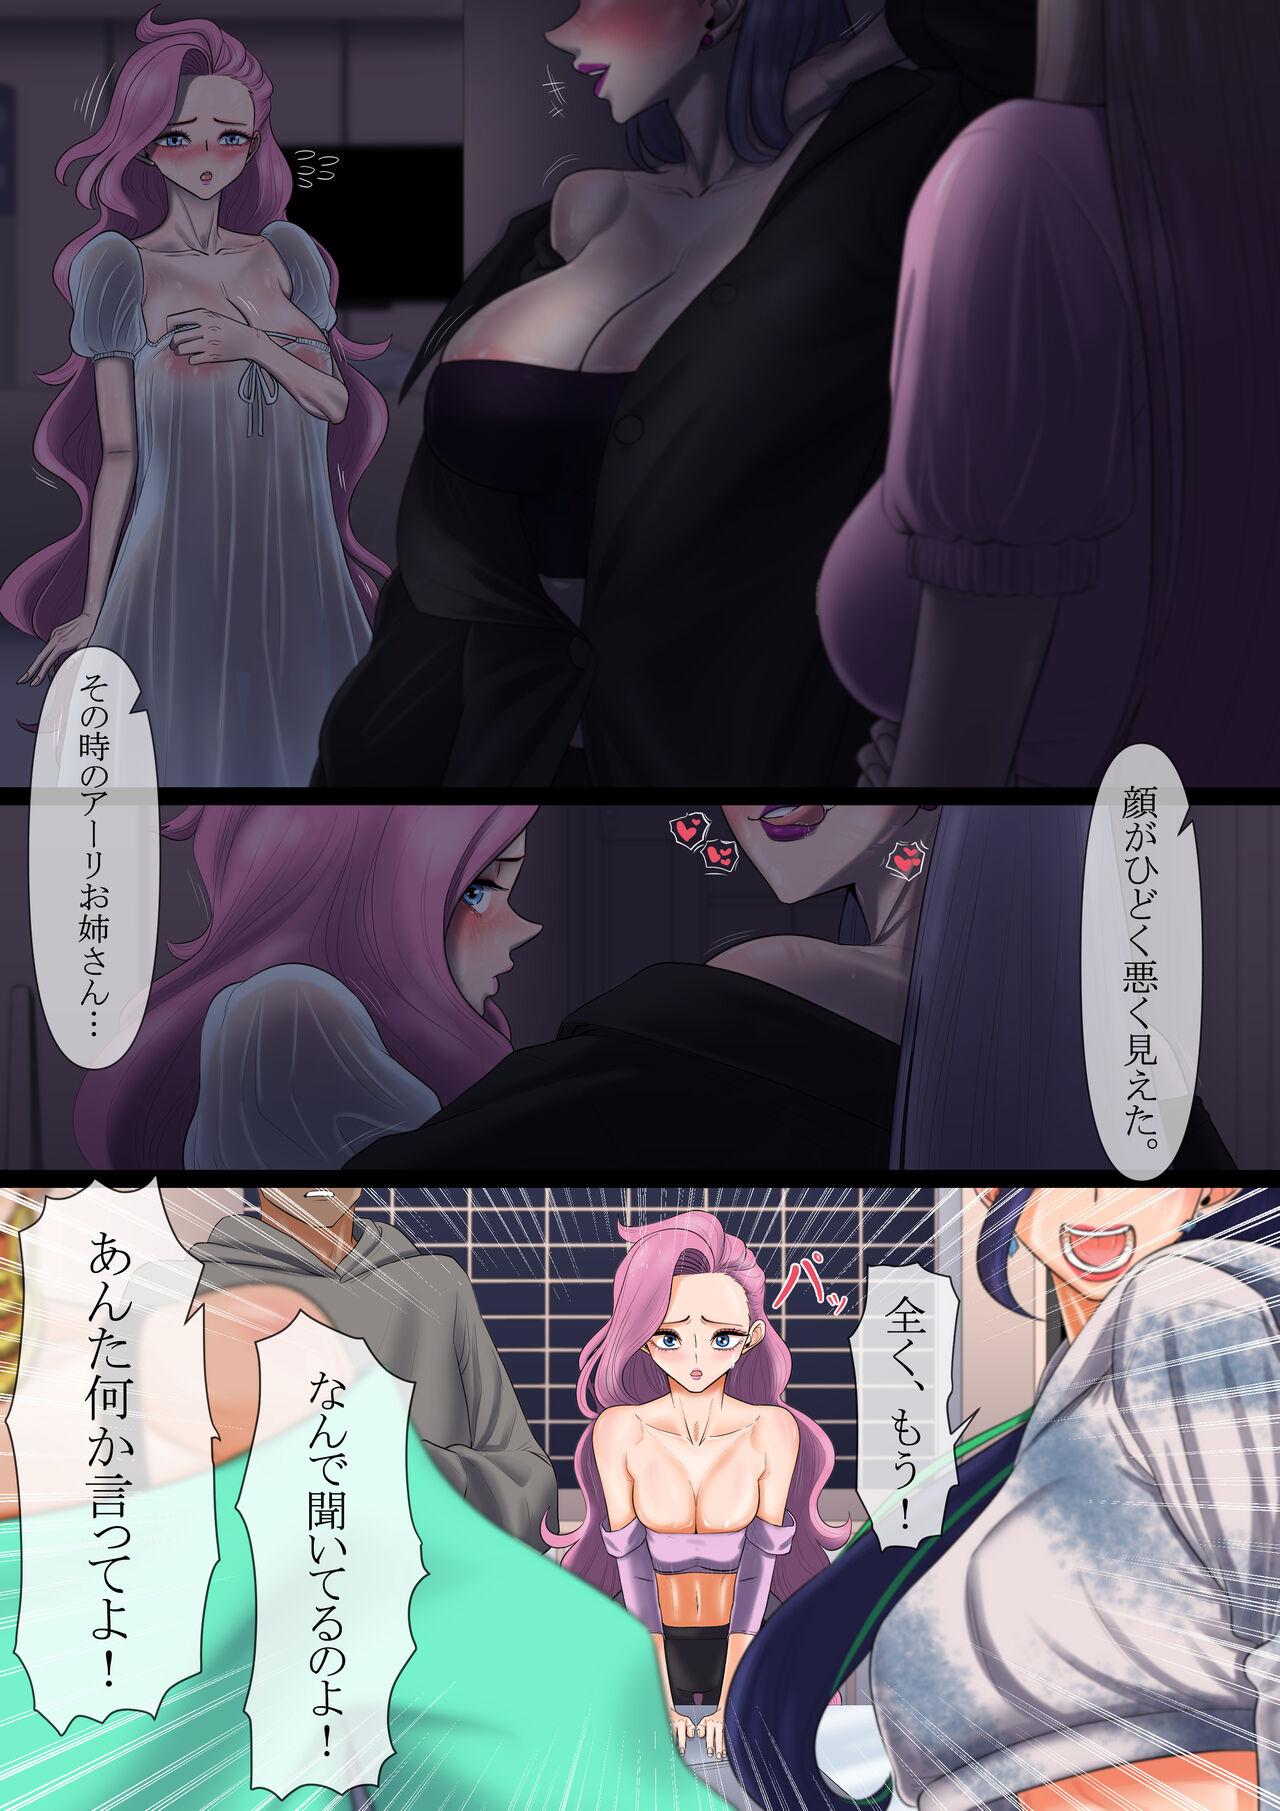 Pussyfucking 守りたいもの... - League of legends Made - Page 4